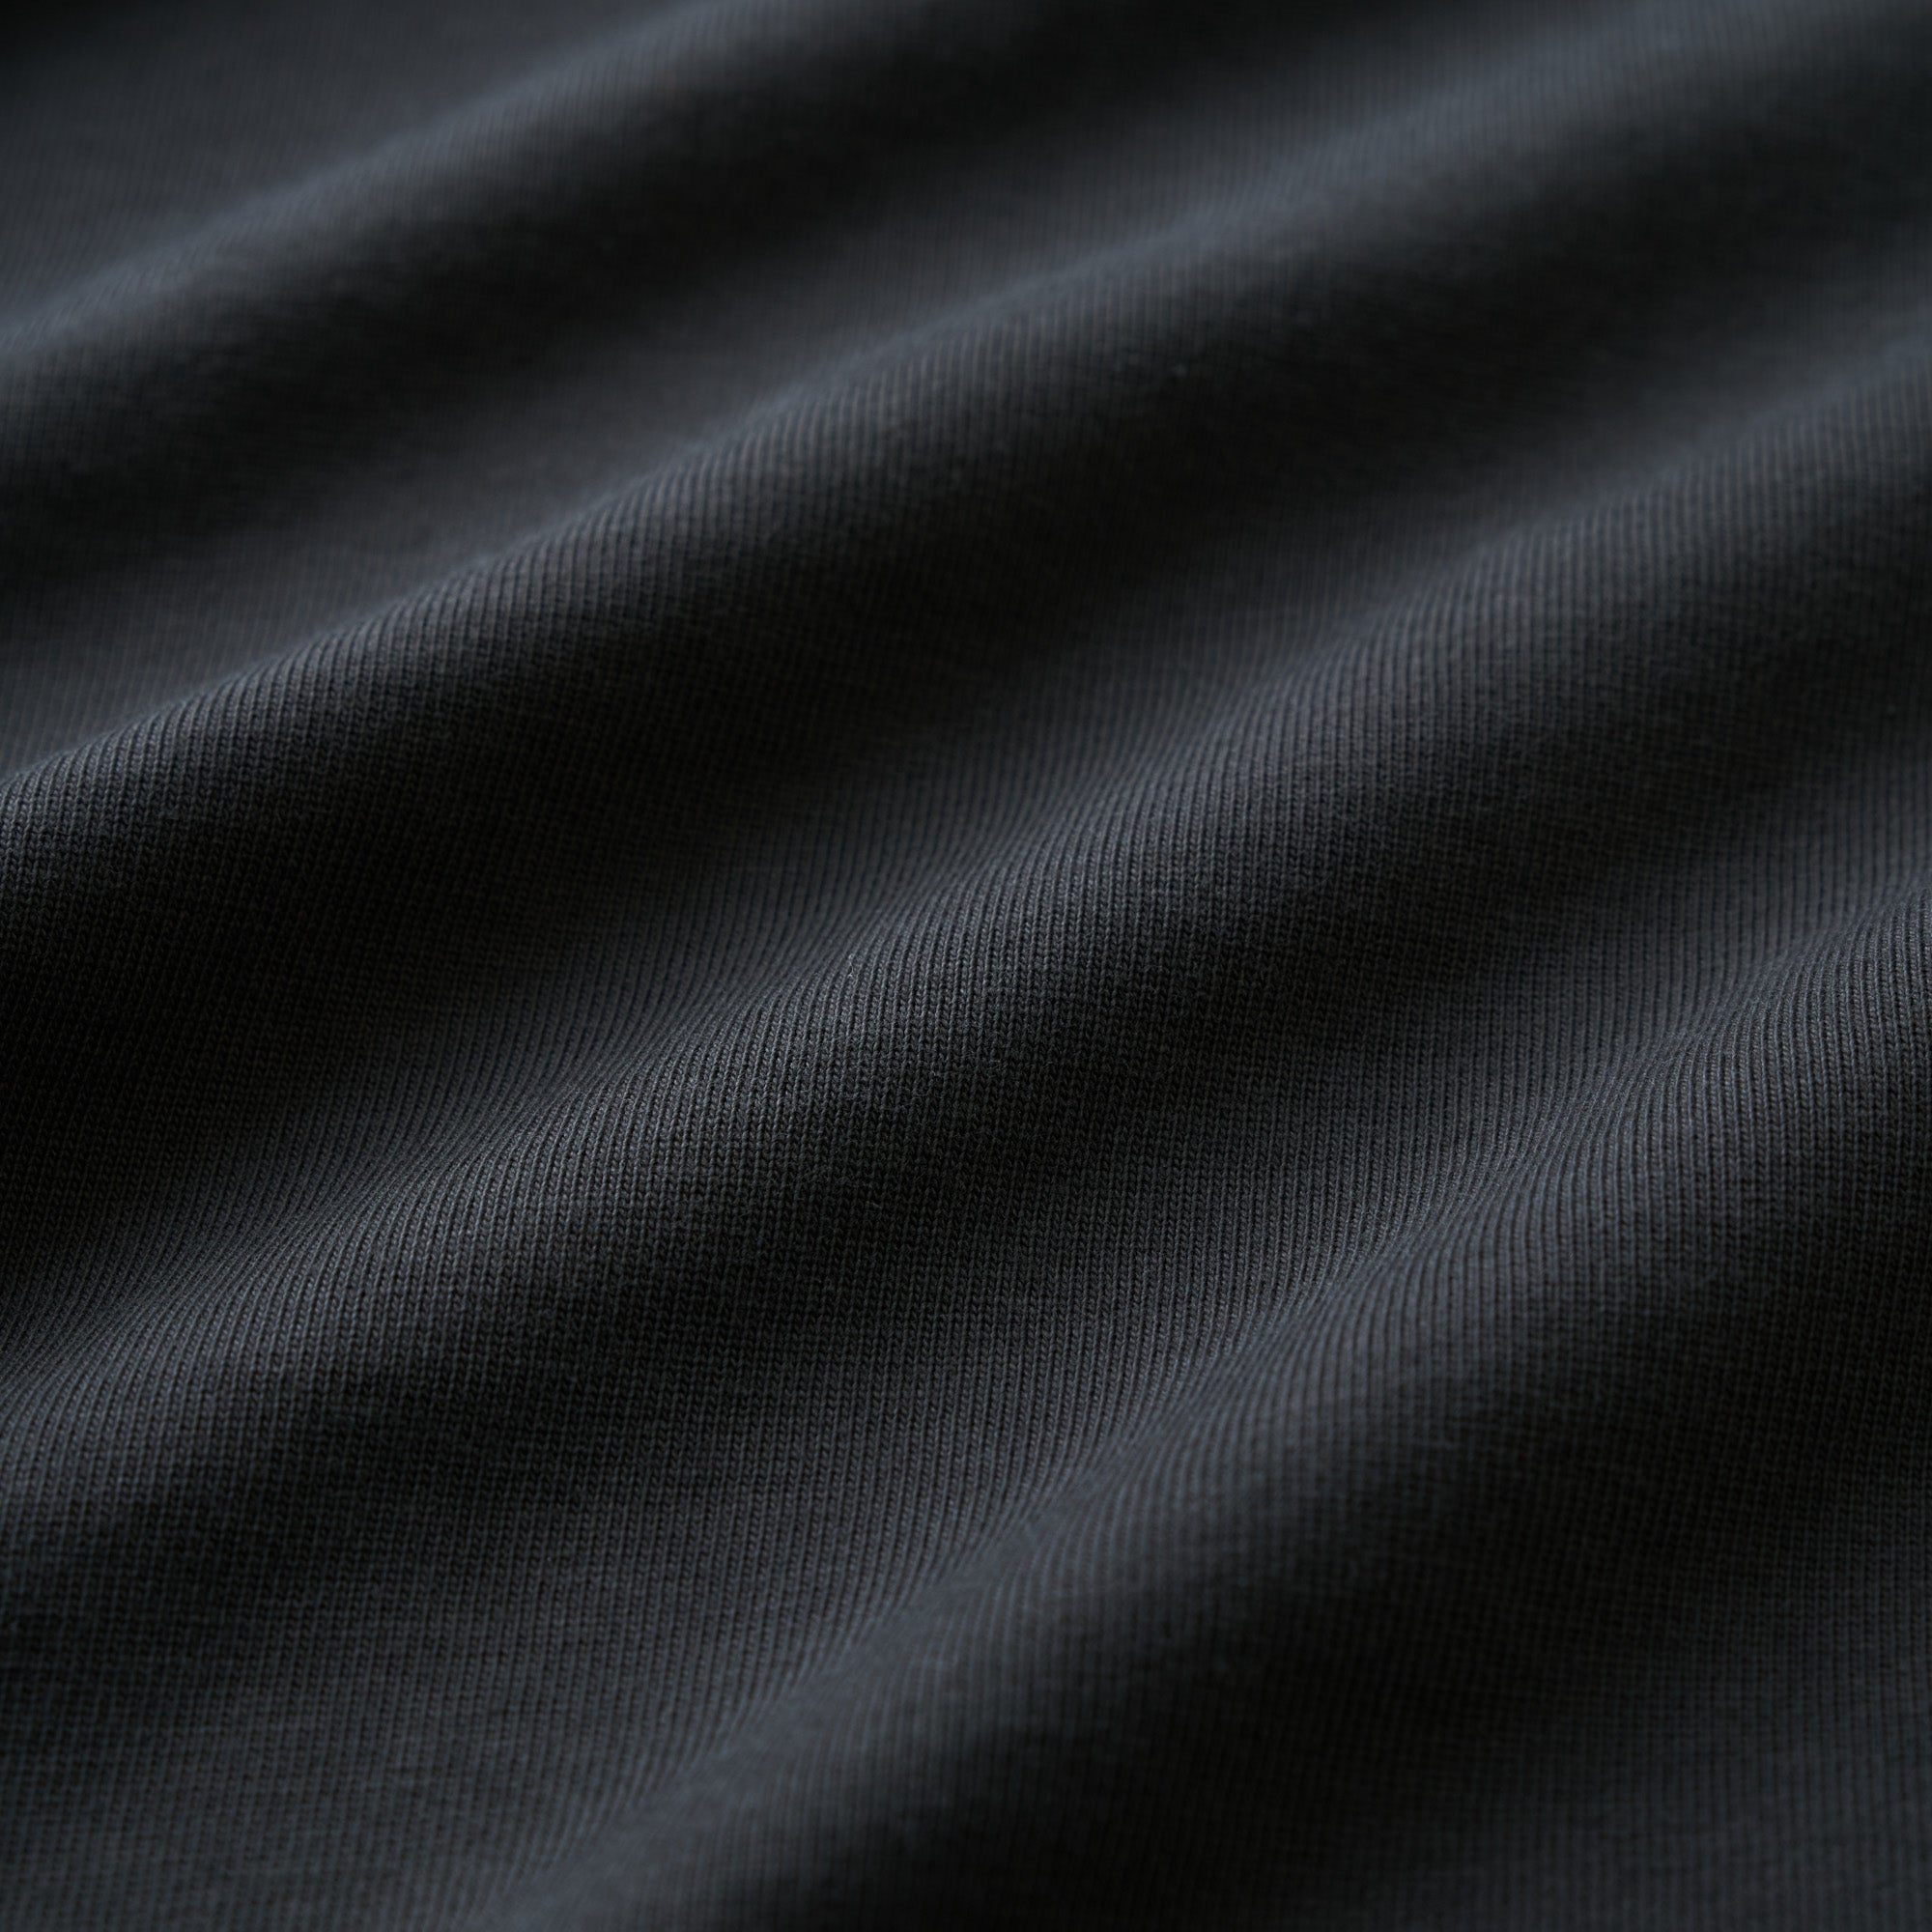 Alfred's Apartment - Trusted Tee - Washed Black